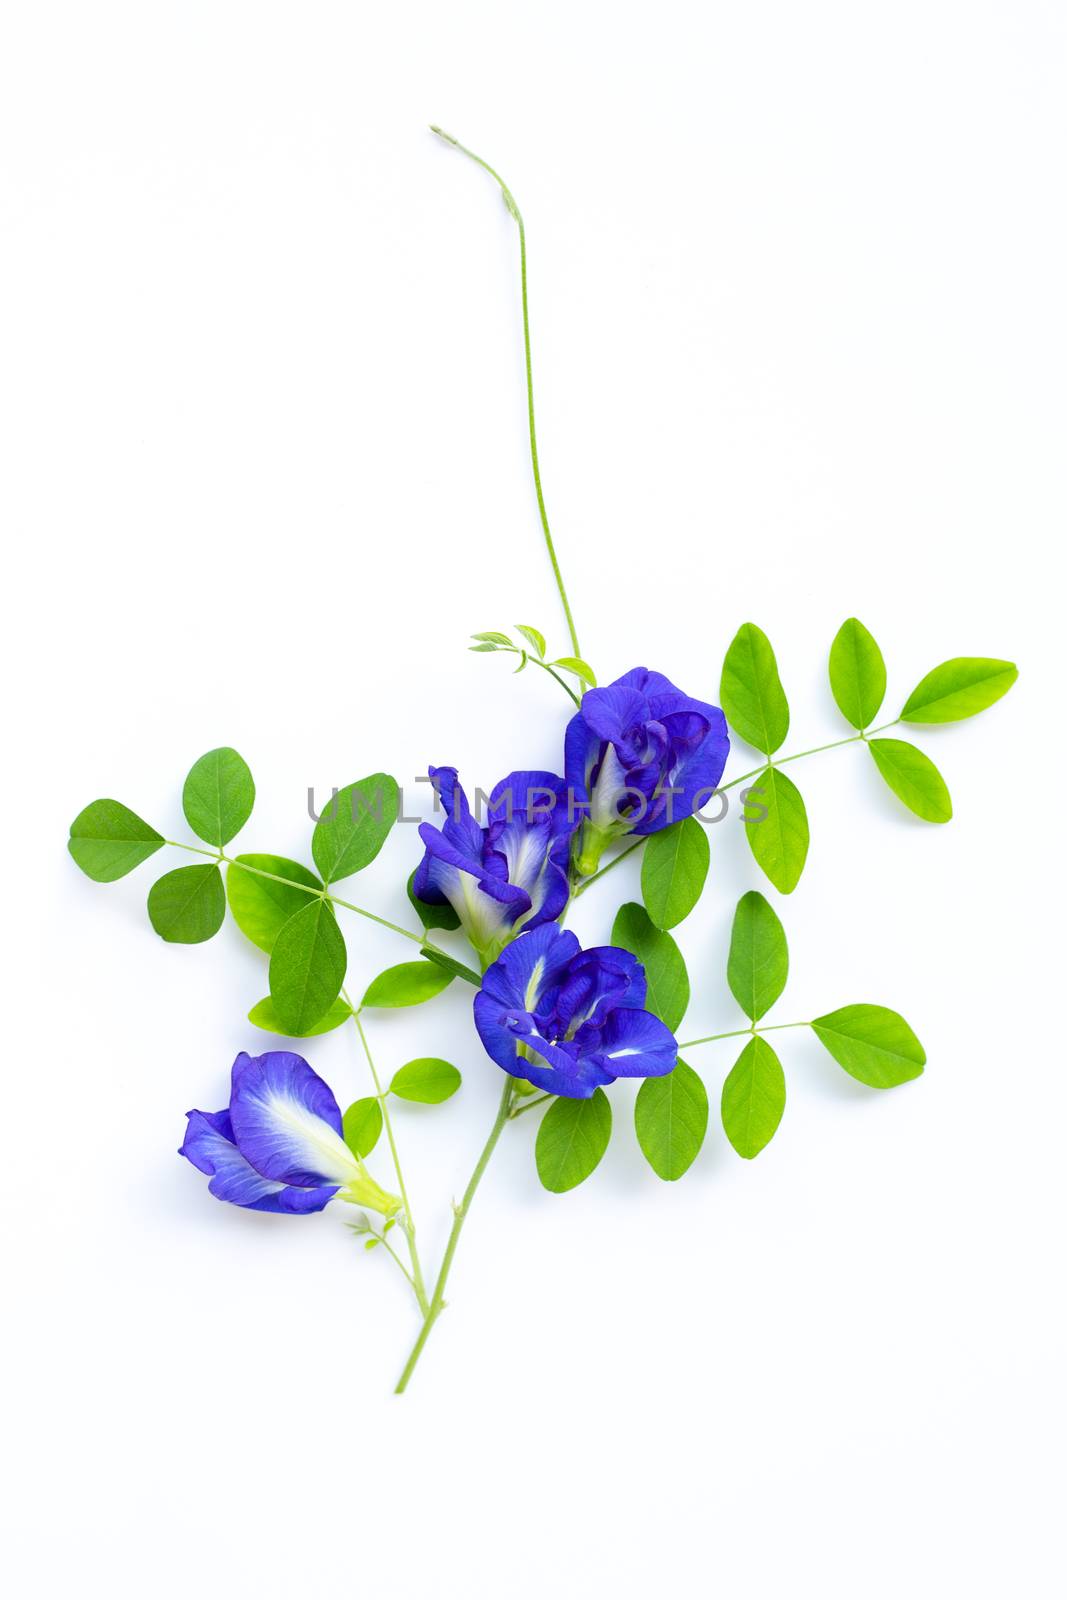 Butterfly pea flower with leaves on white background. Top view